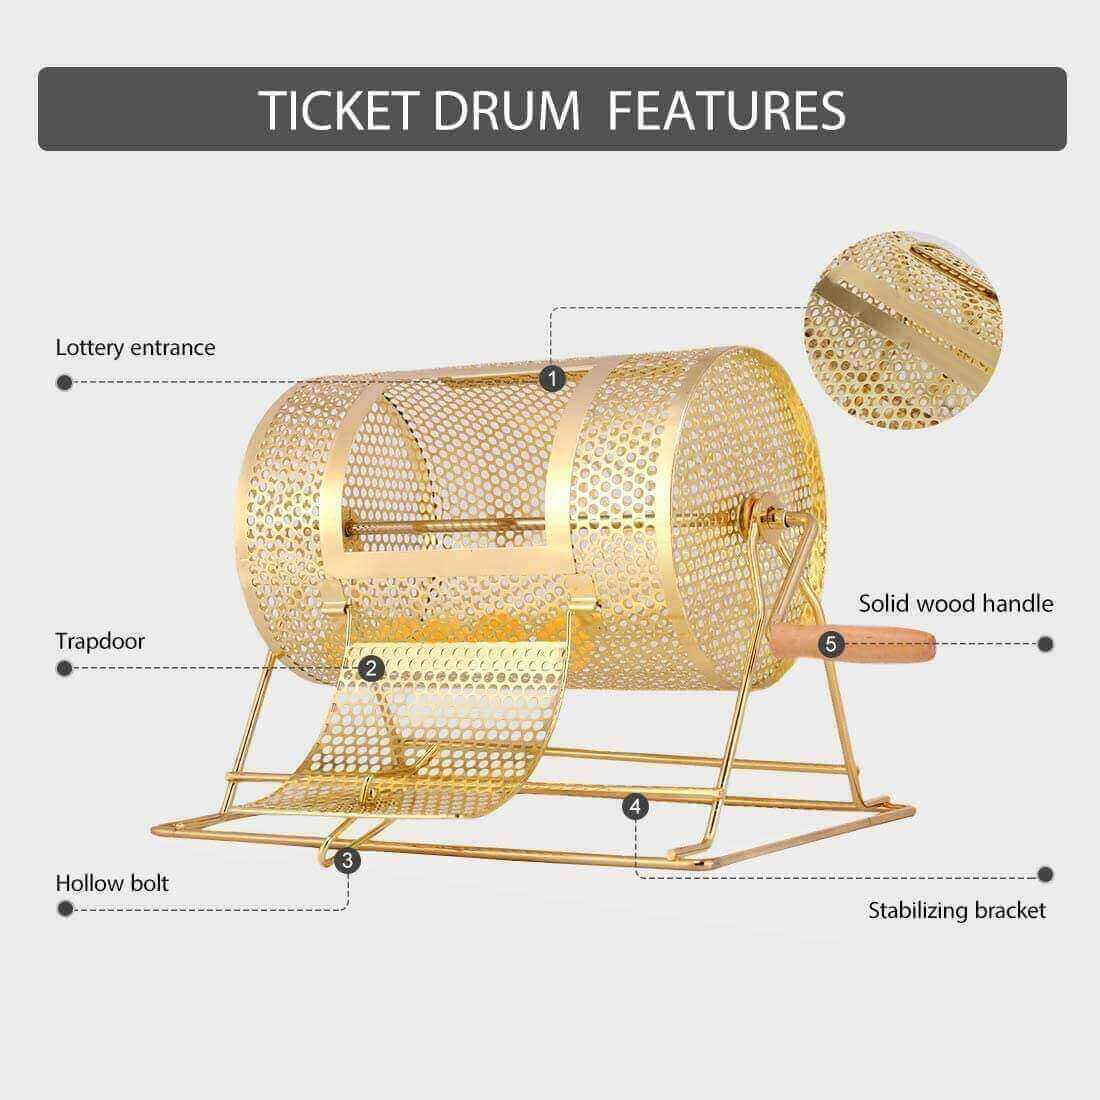 VIVOHOME 11 Inch x 8 Inch Brass Plated Raffle Drum Lottery Spinning Drawing with Wooden Turning Handle Holds 3000 Tickets